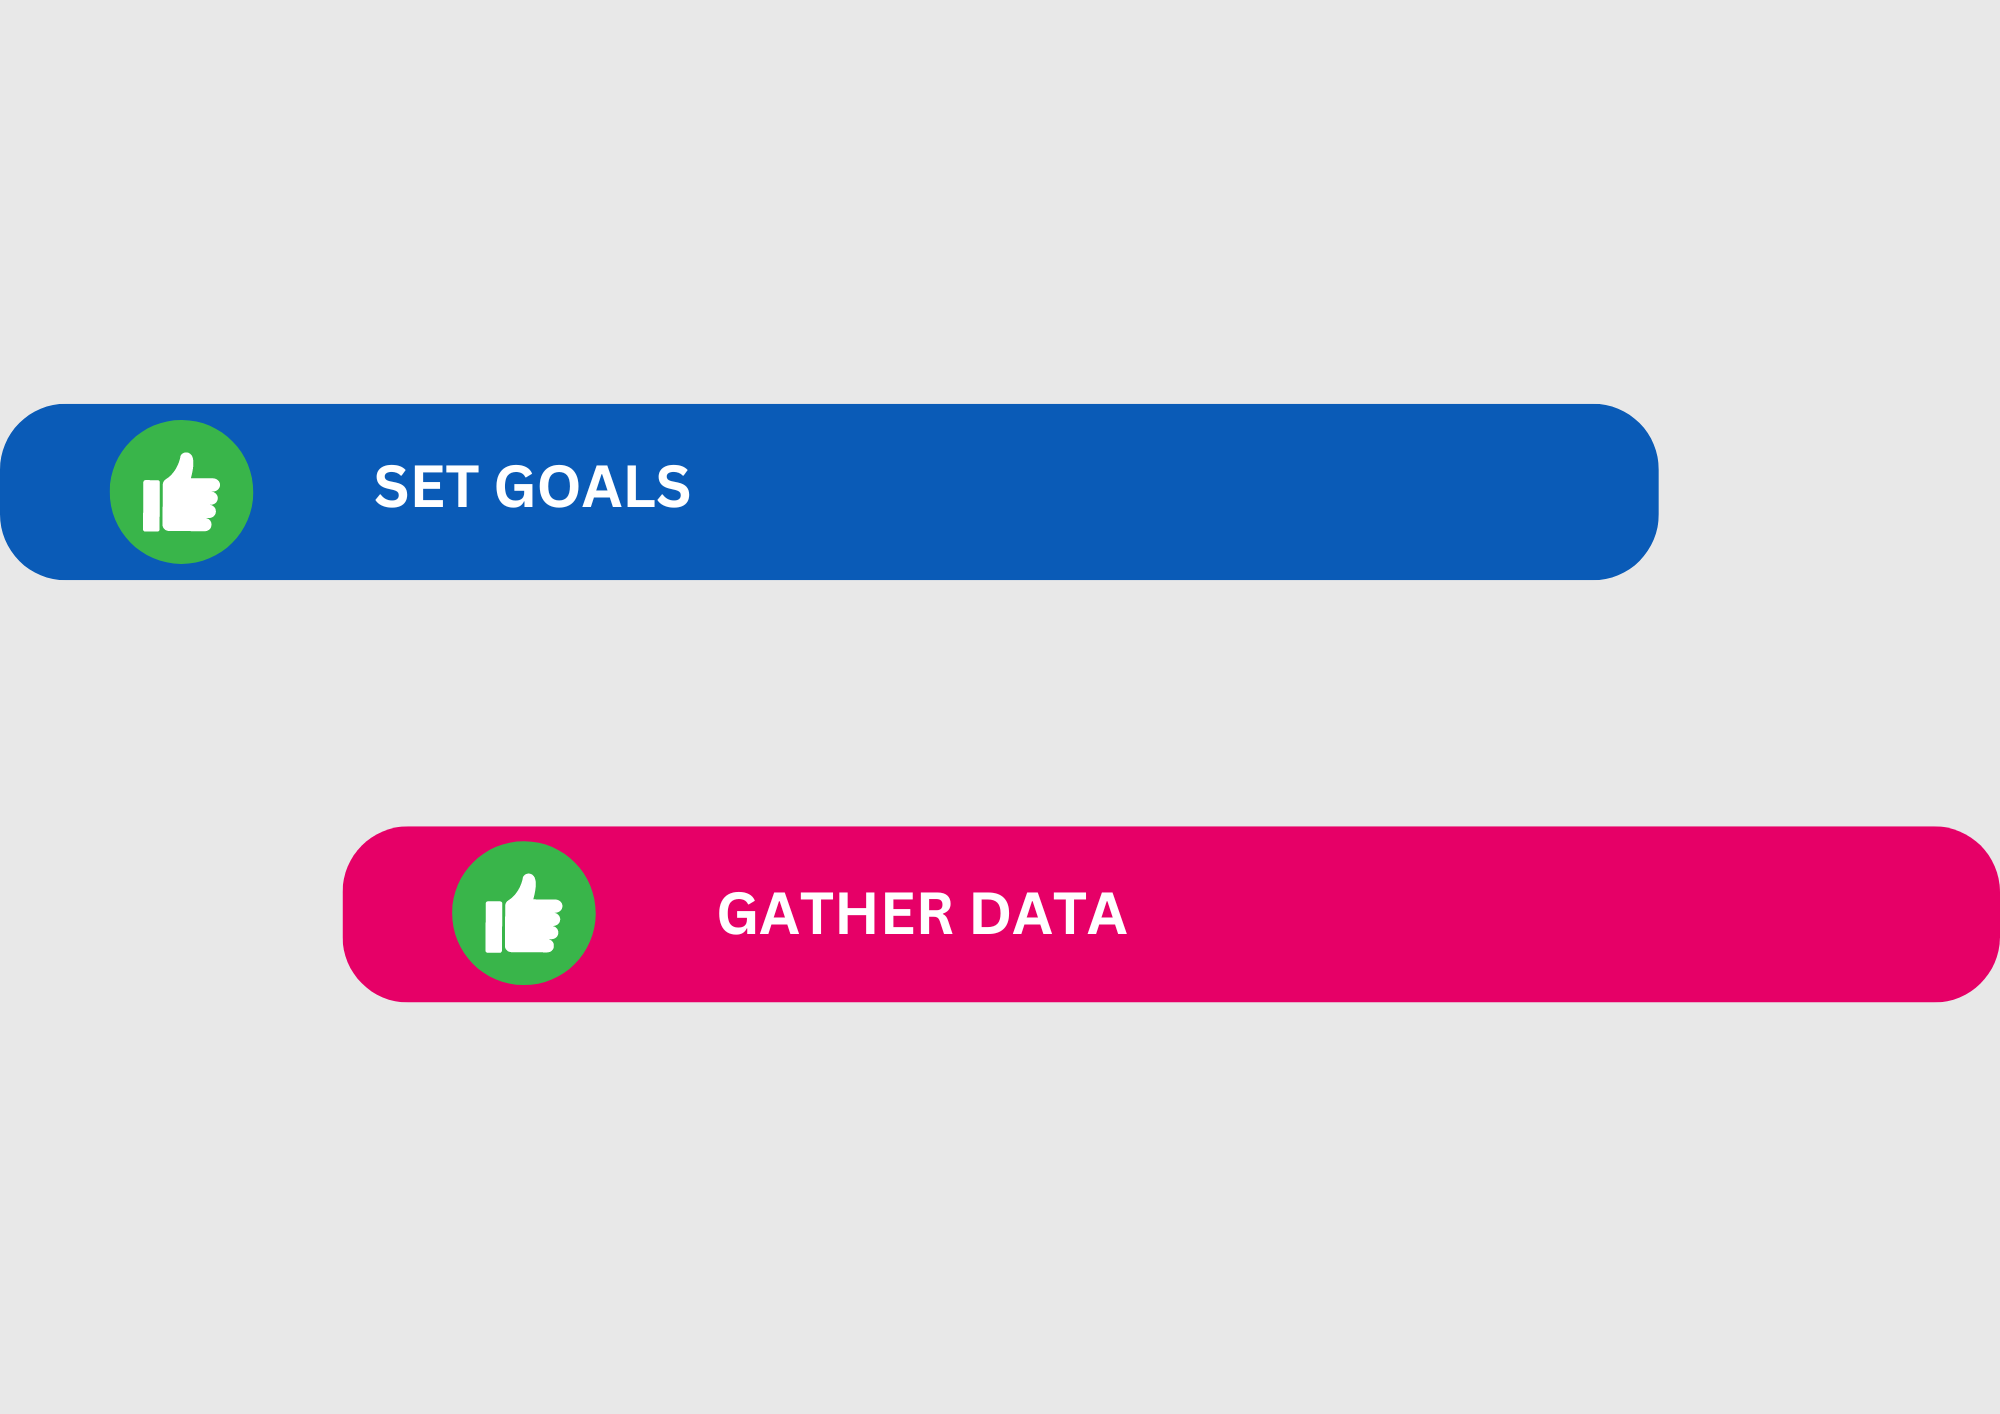 set goals and gather data for SERP ranking